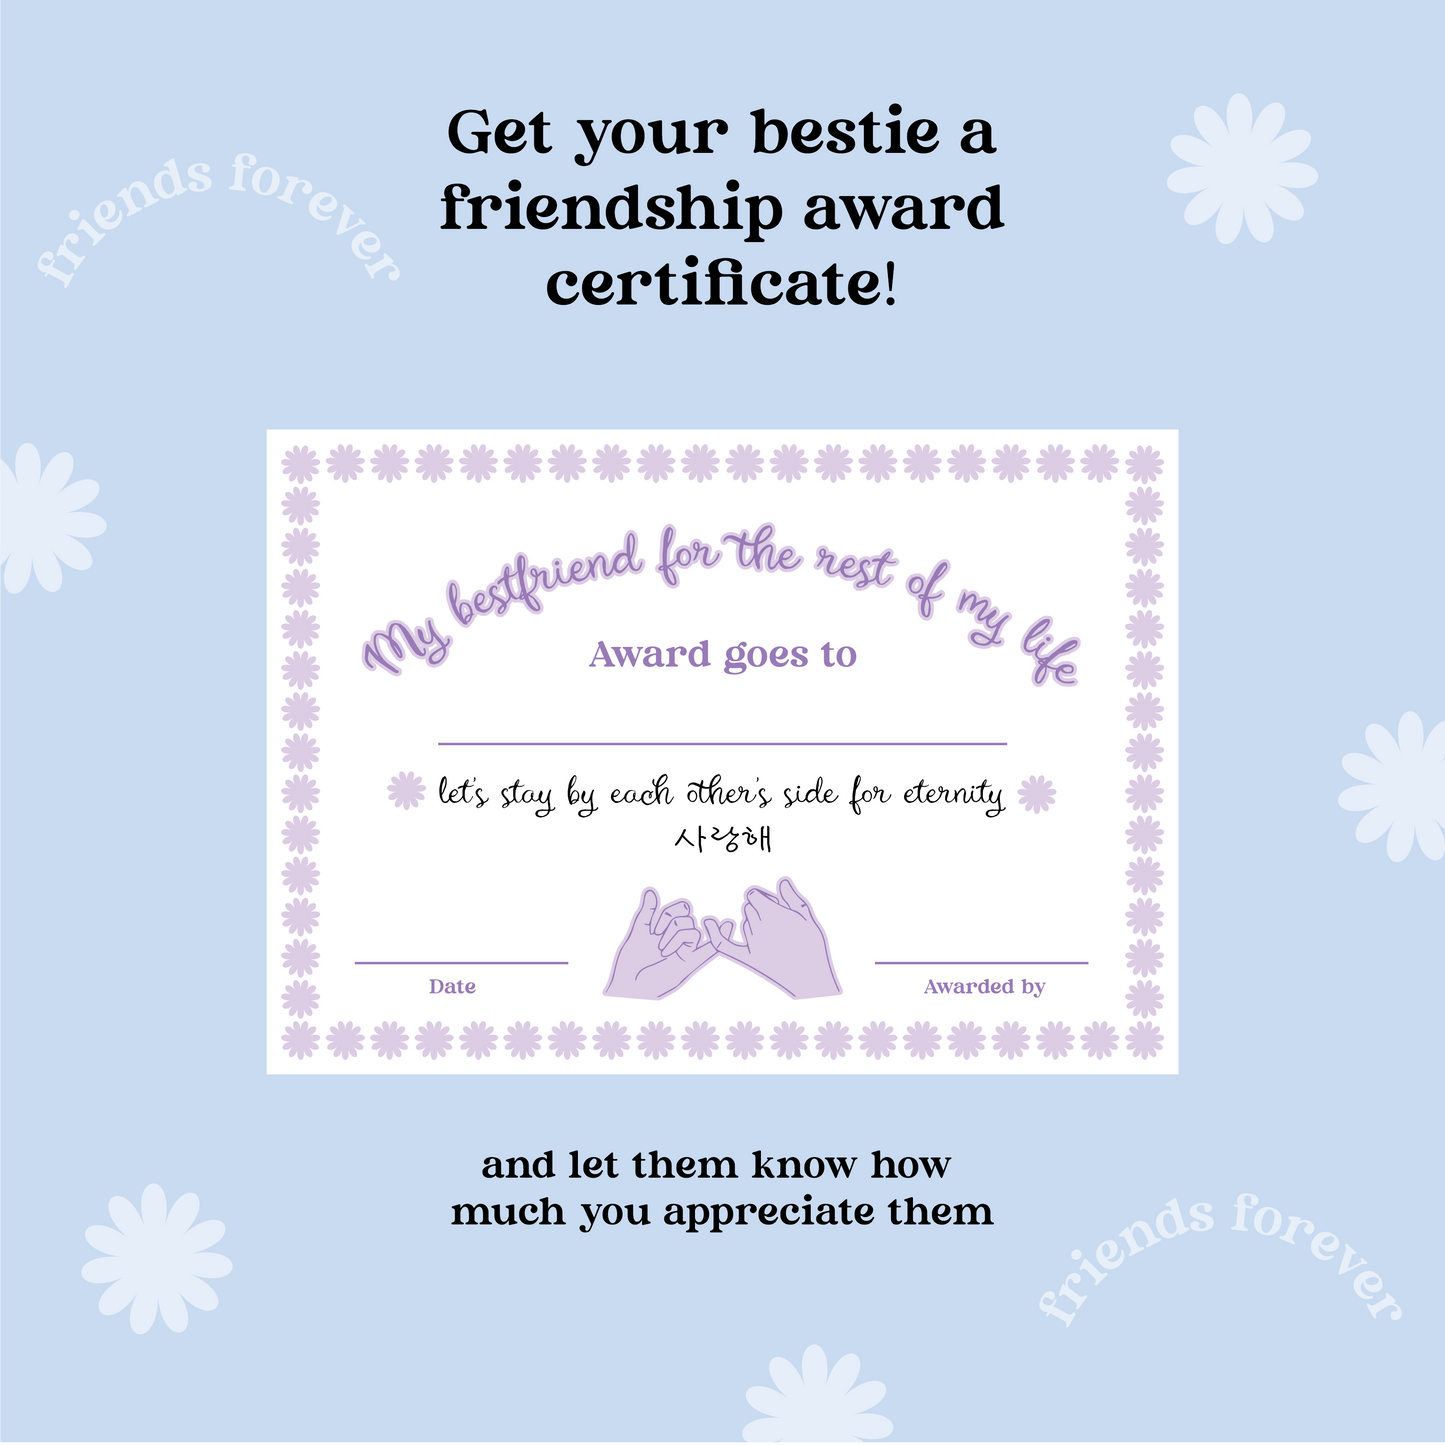 Our Friendship Certificate - BTS Friendship Day Special